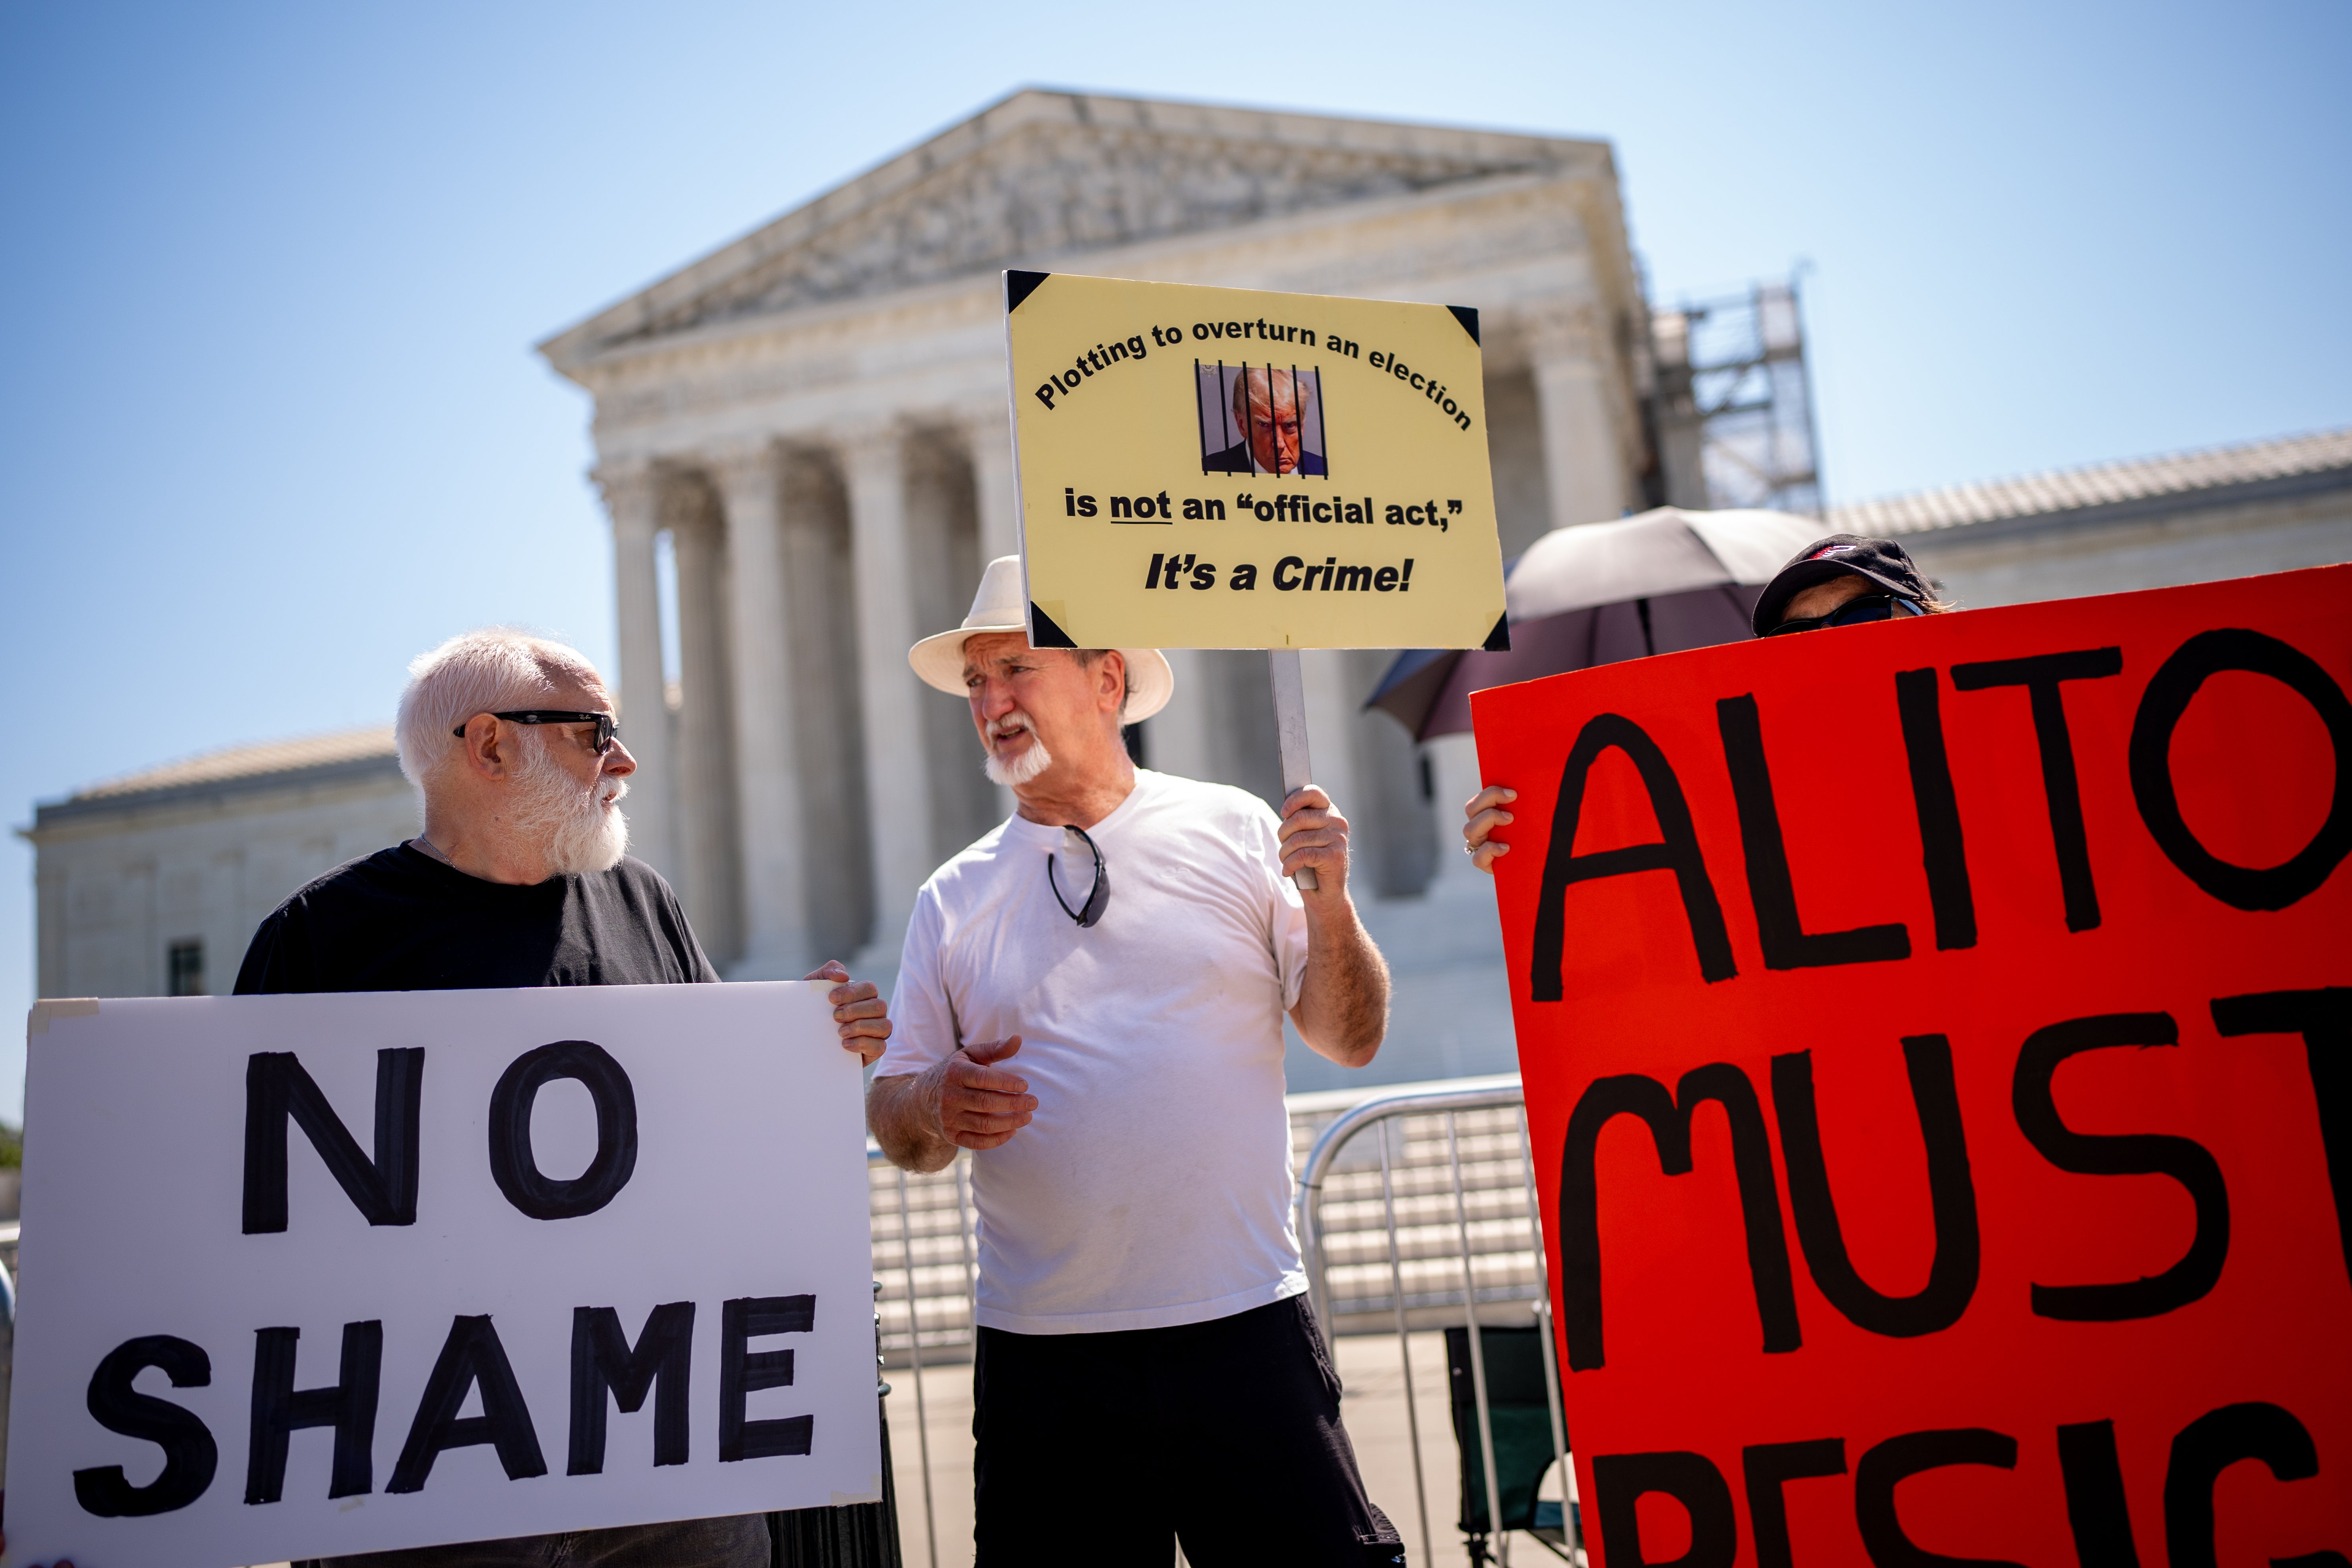 Protesters outside the Supreme Court blast both conservative Justice Samuel Alito, who rejected calls to recuse himself from Trump-related cases, and Trump’s defense that his attempts to overturn election results were “official” acts as president